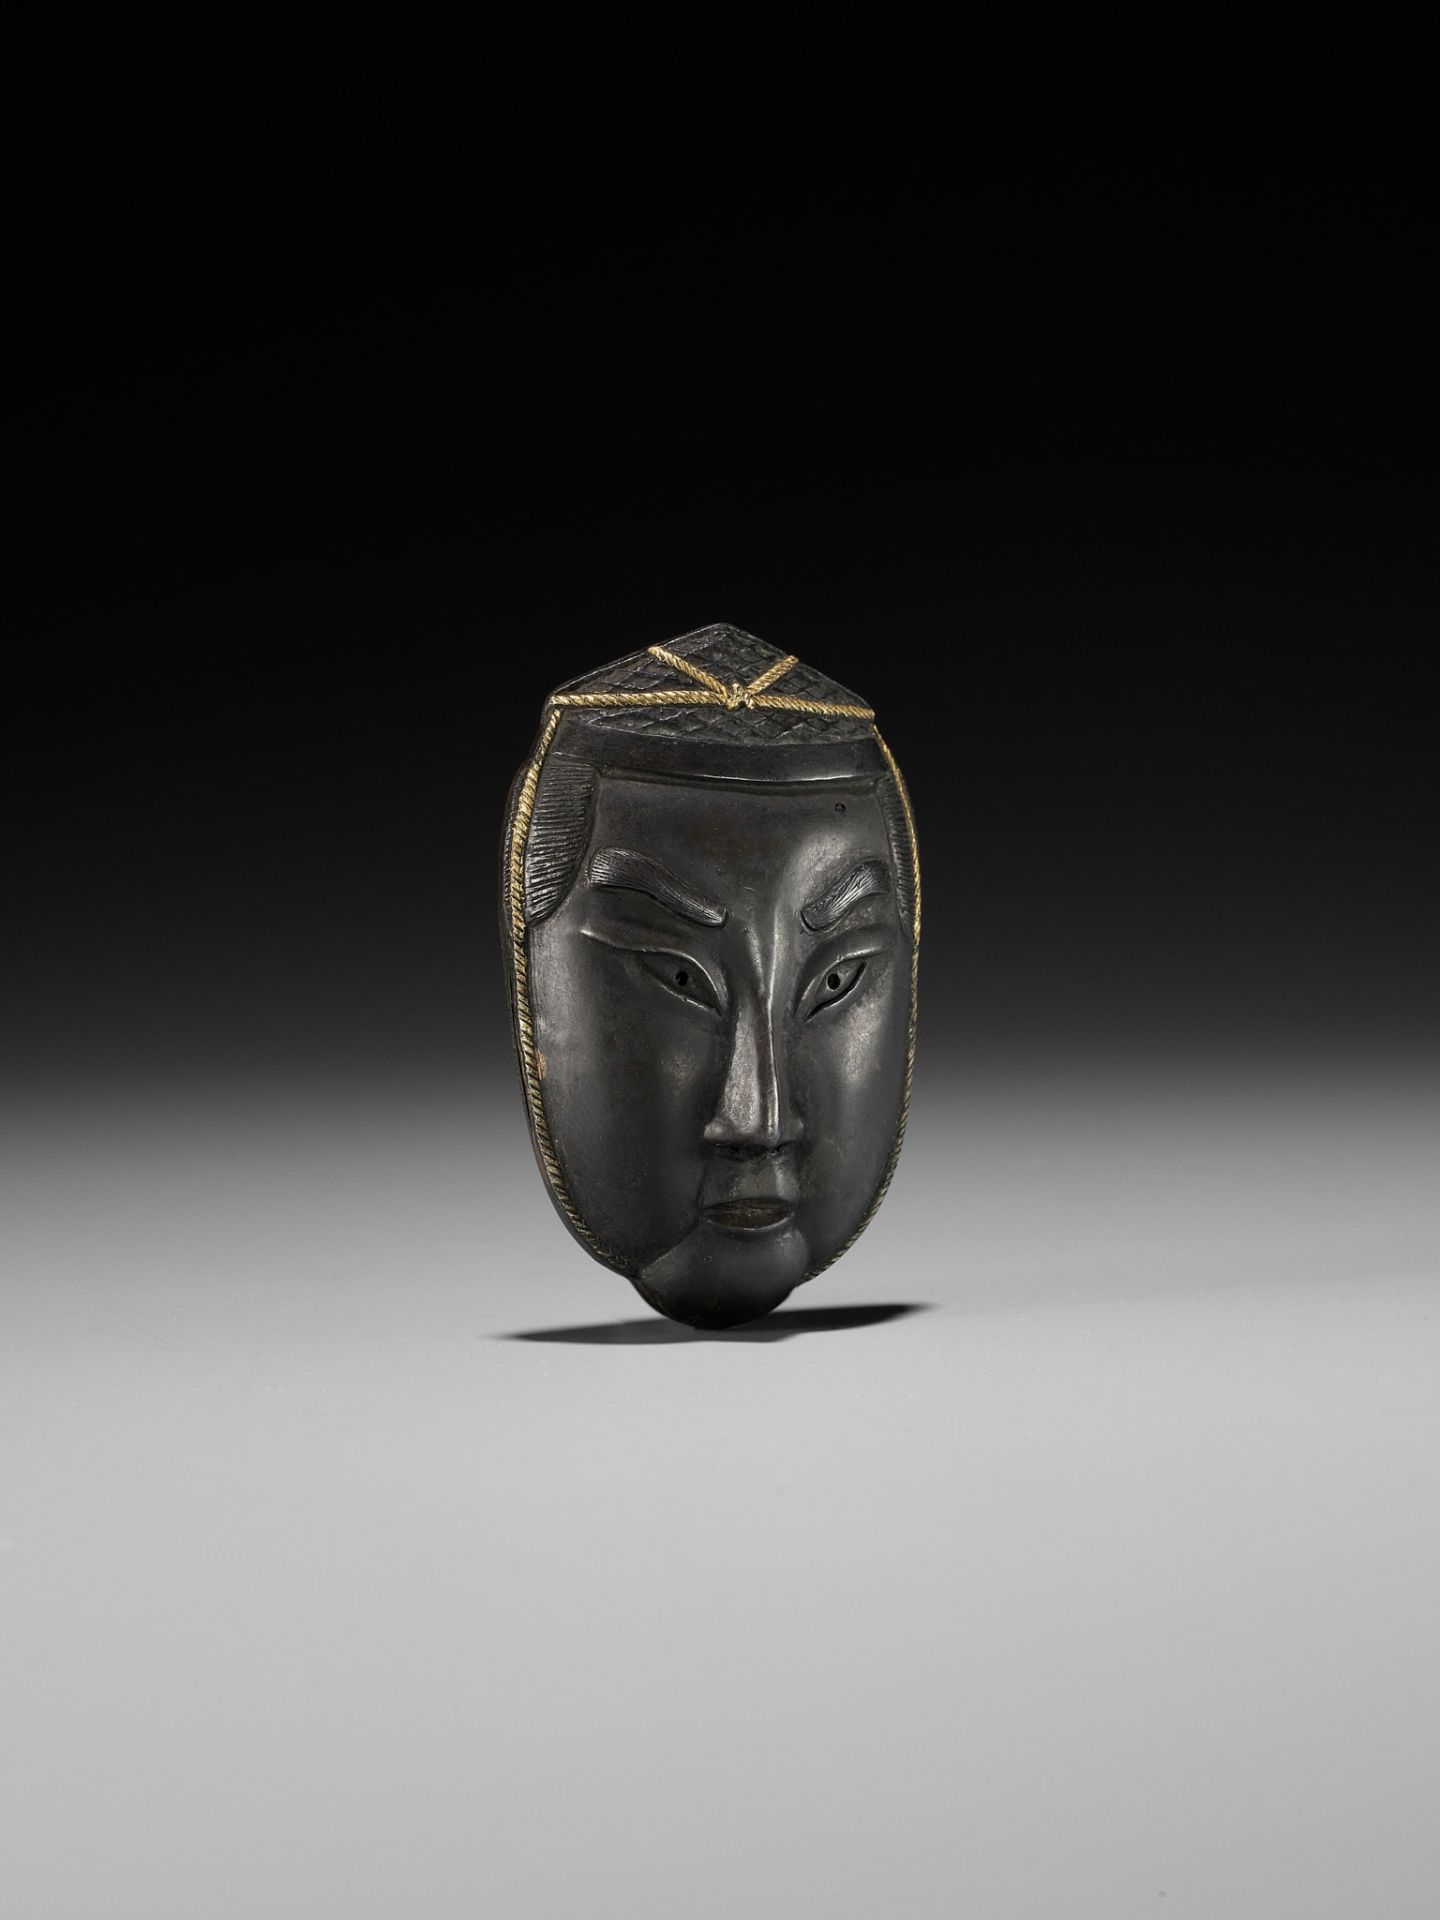 A RARE MIXED METAL NETSUKE DEPICTING THE HEAD OF A NOBLEMAN - Image 4 of 9